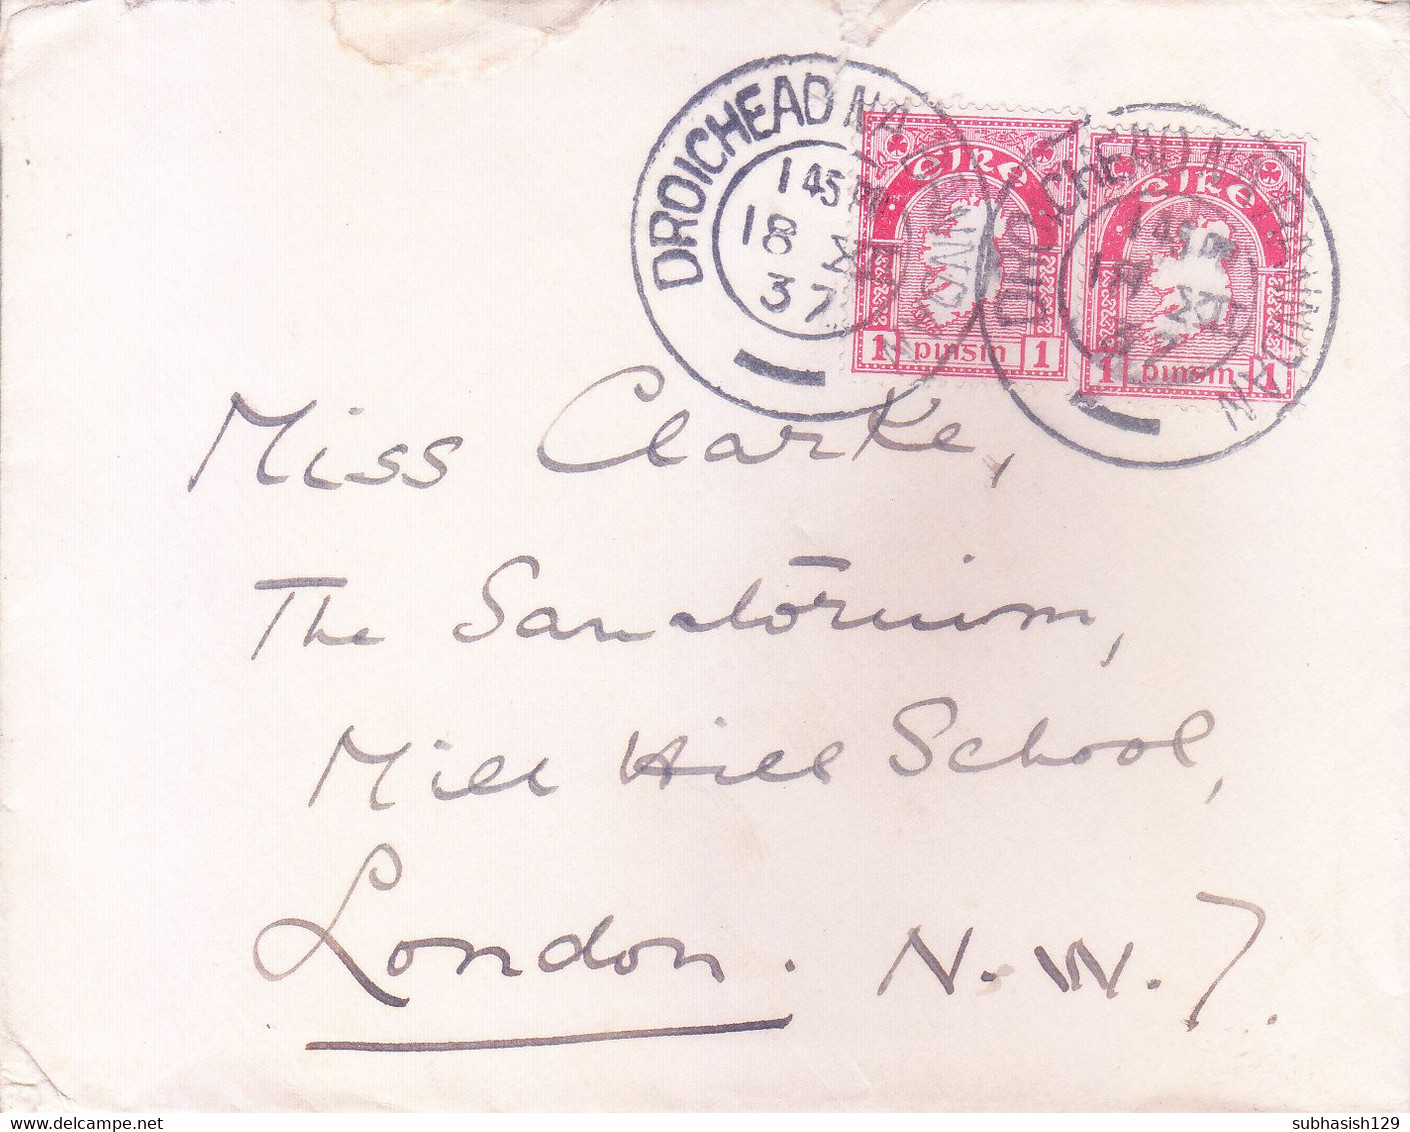 IRELAND : ENTIRE : YEAR 1937 : COVER POSTED FROM DROICHEAD NA RANNDAN FOR LONDON : USE OF 2v 1 PINSIN STAMPS - Lettres & Documents